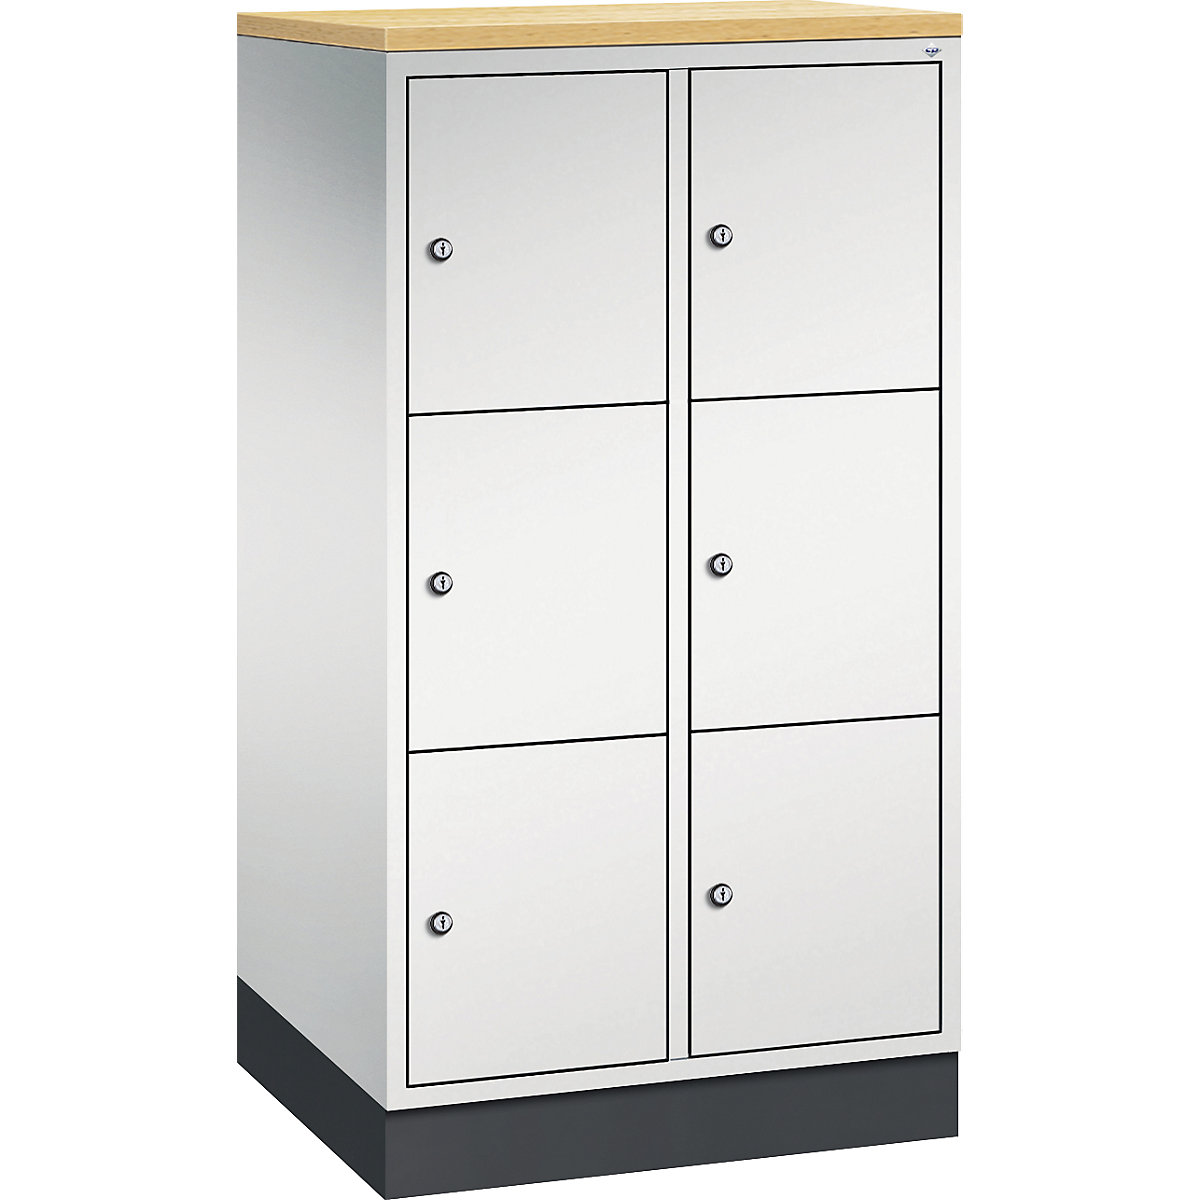 INTRO steel compartment locker, compartment height 345 mm – C+P, WxD 620 x 500 mm, 6 compartments, light grey body, light grey doors